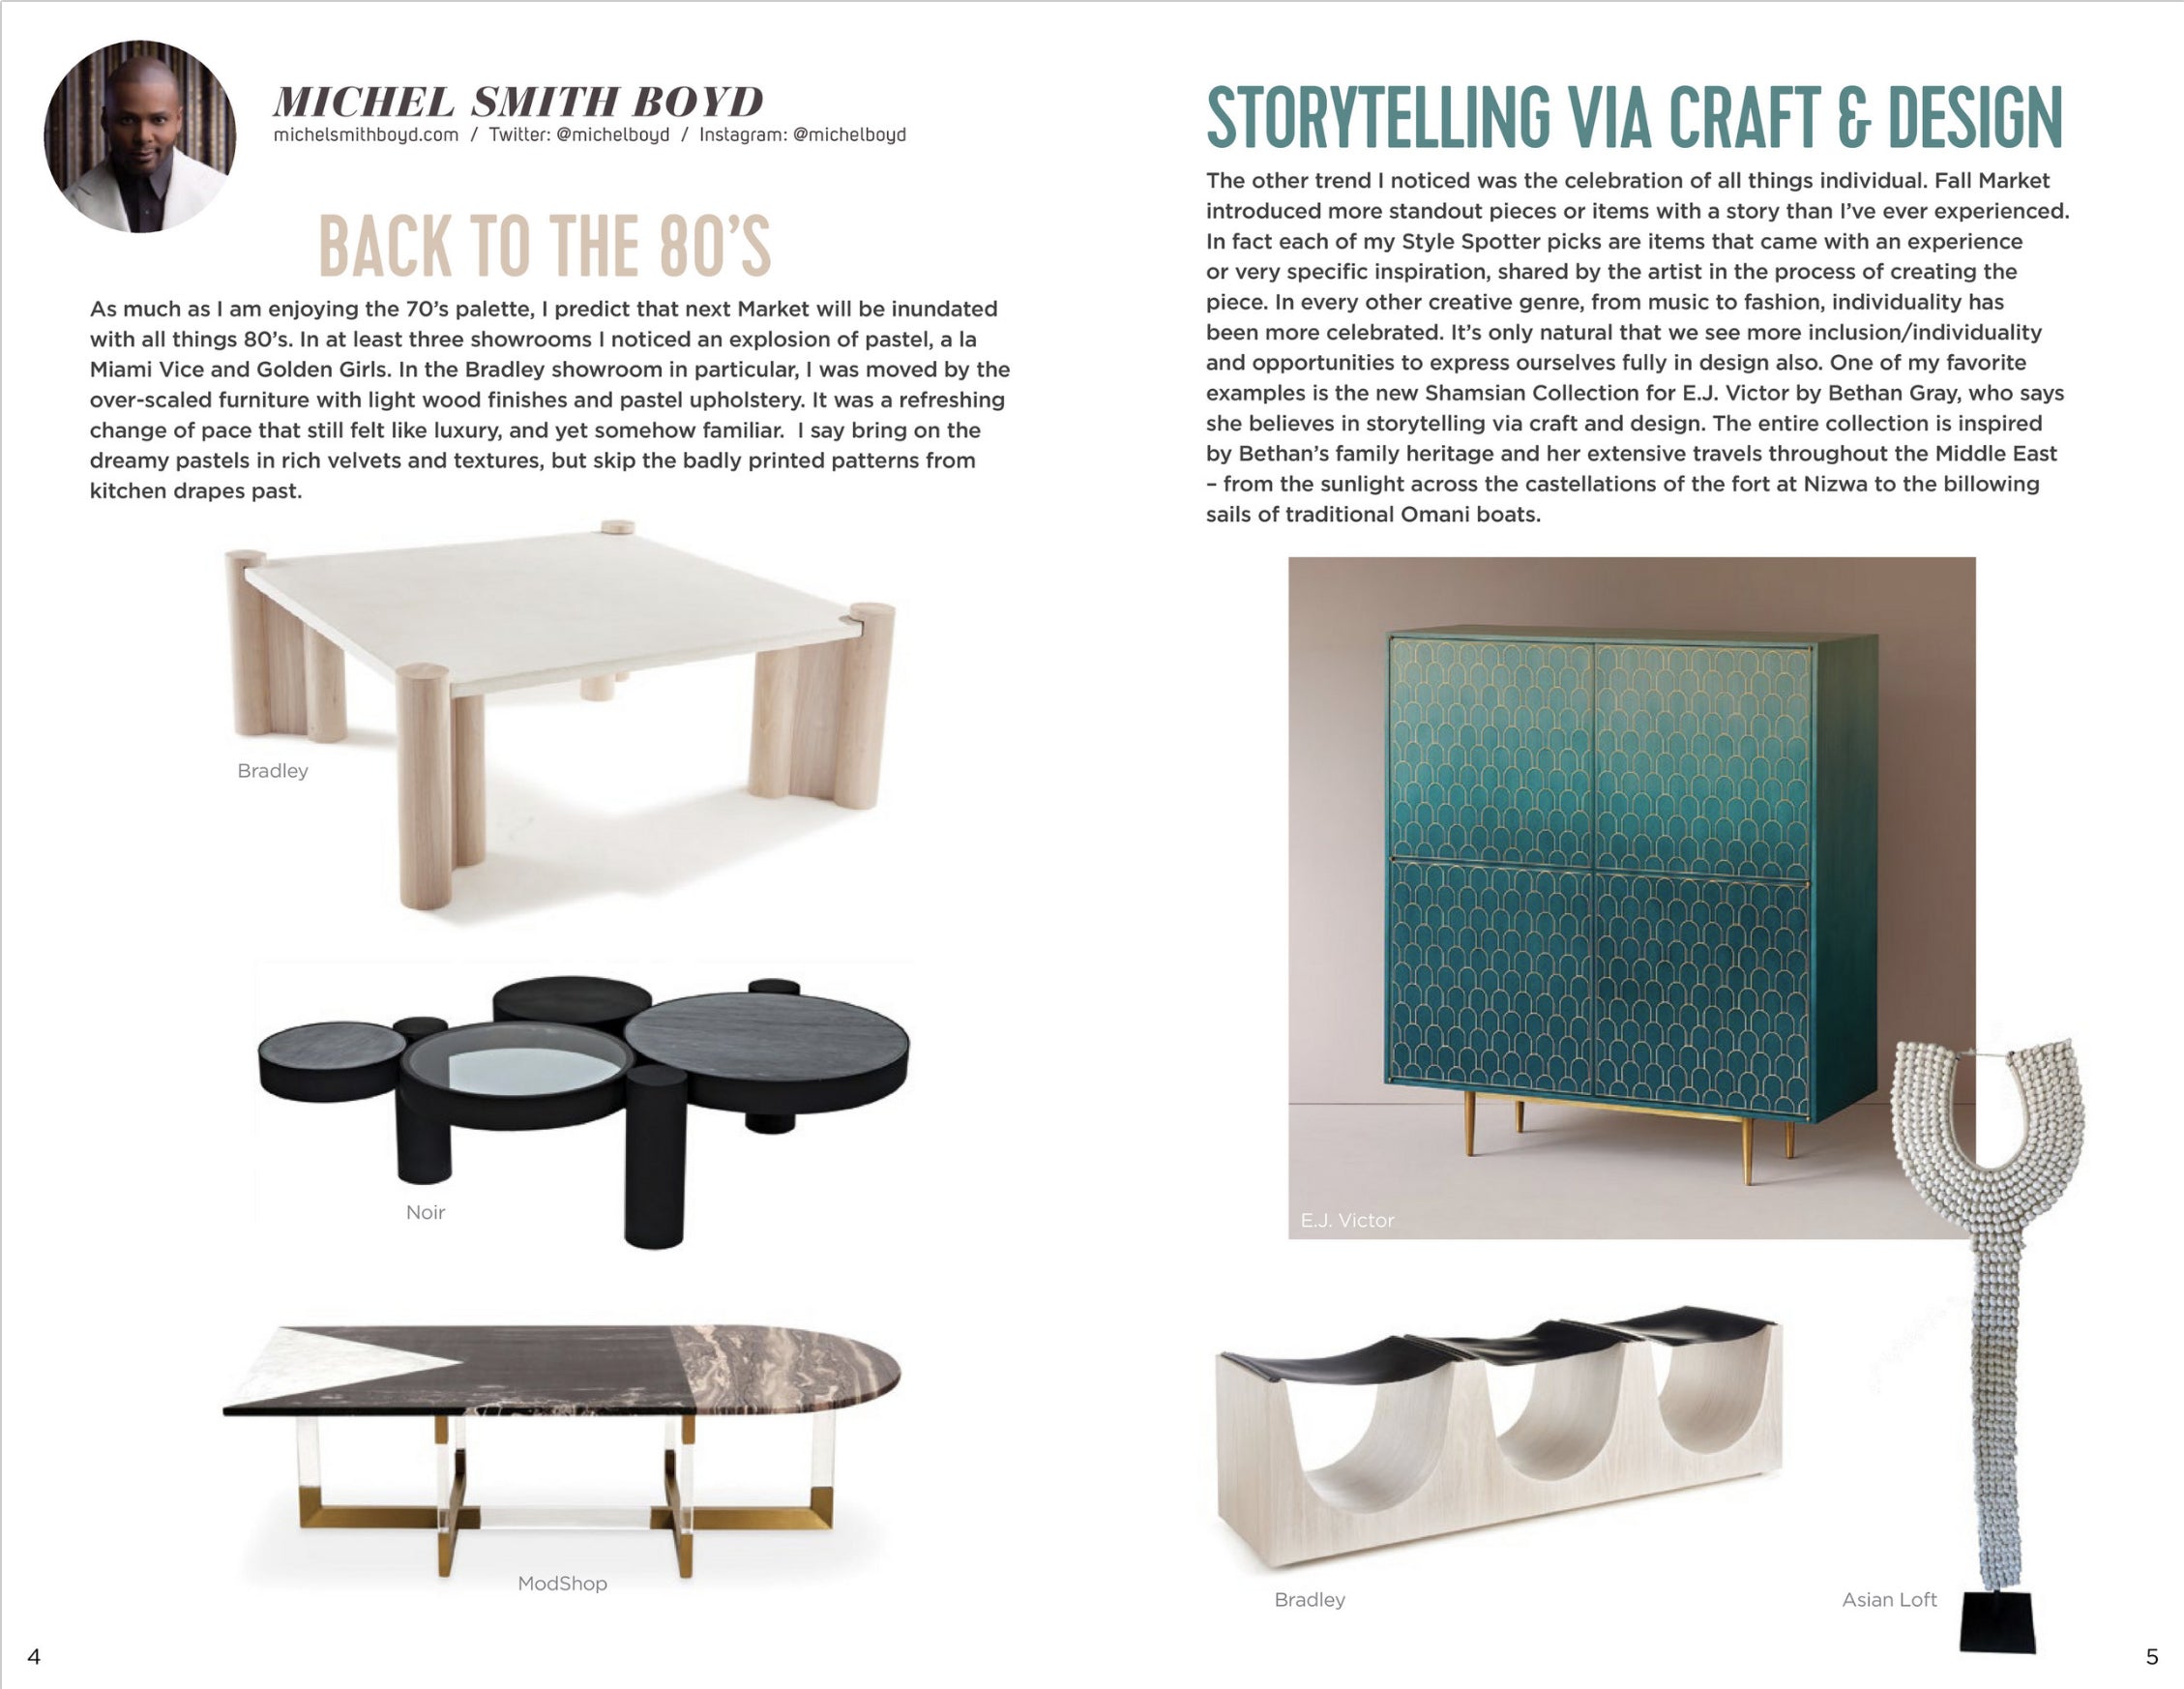 high point market style report featuring michel smith boyd pick of modshop's marseille coffee table